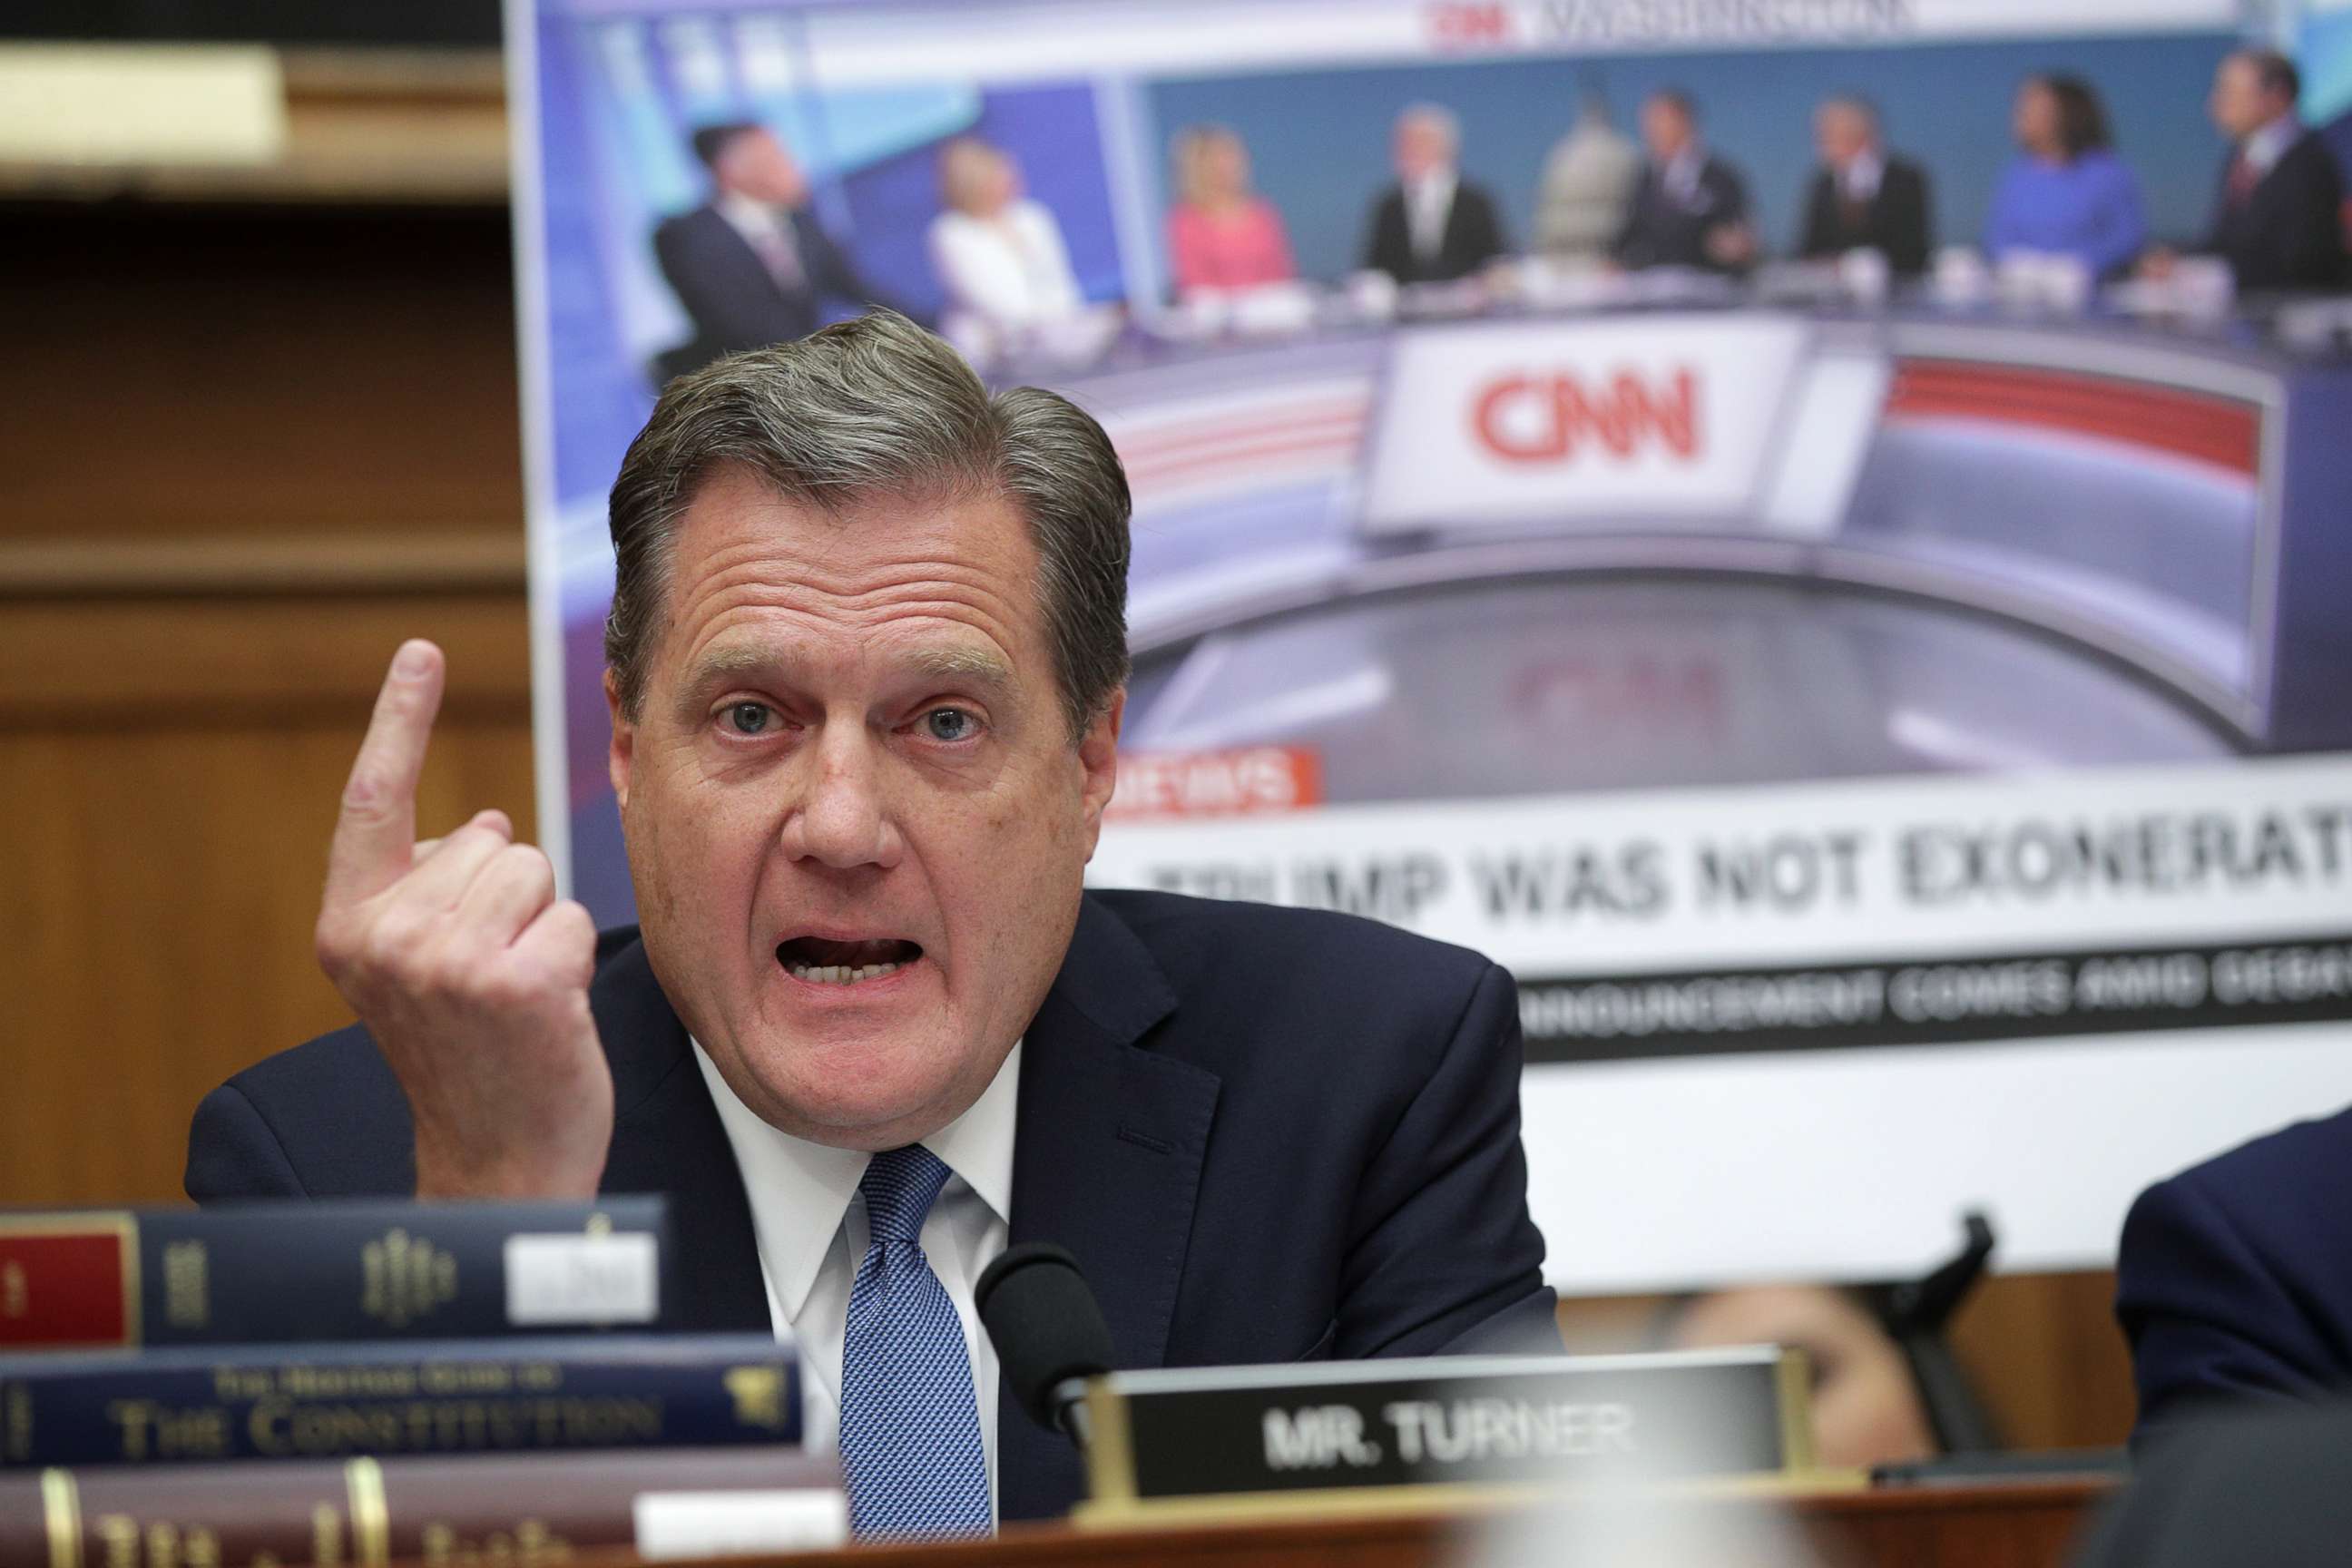 PHOTO: Rep. Mike Turner questions former Special Counsel Robert Mueller as Mueller appears before the House Intelligence Committee about his report on Russian interference in the 2016 presidential election, July 24, 2019, in Washington, D.C.